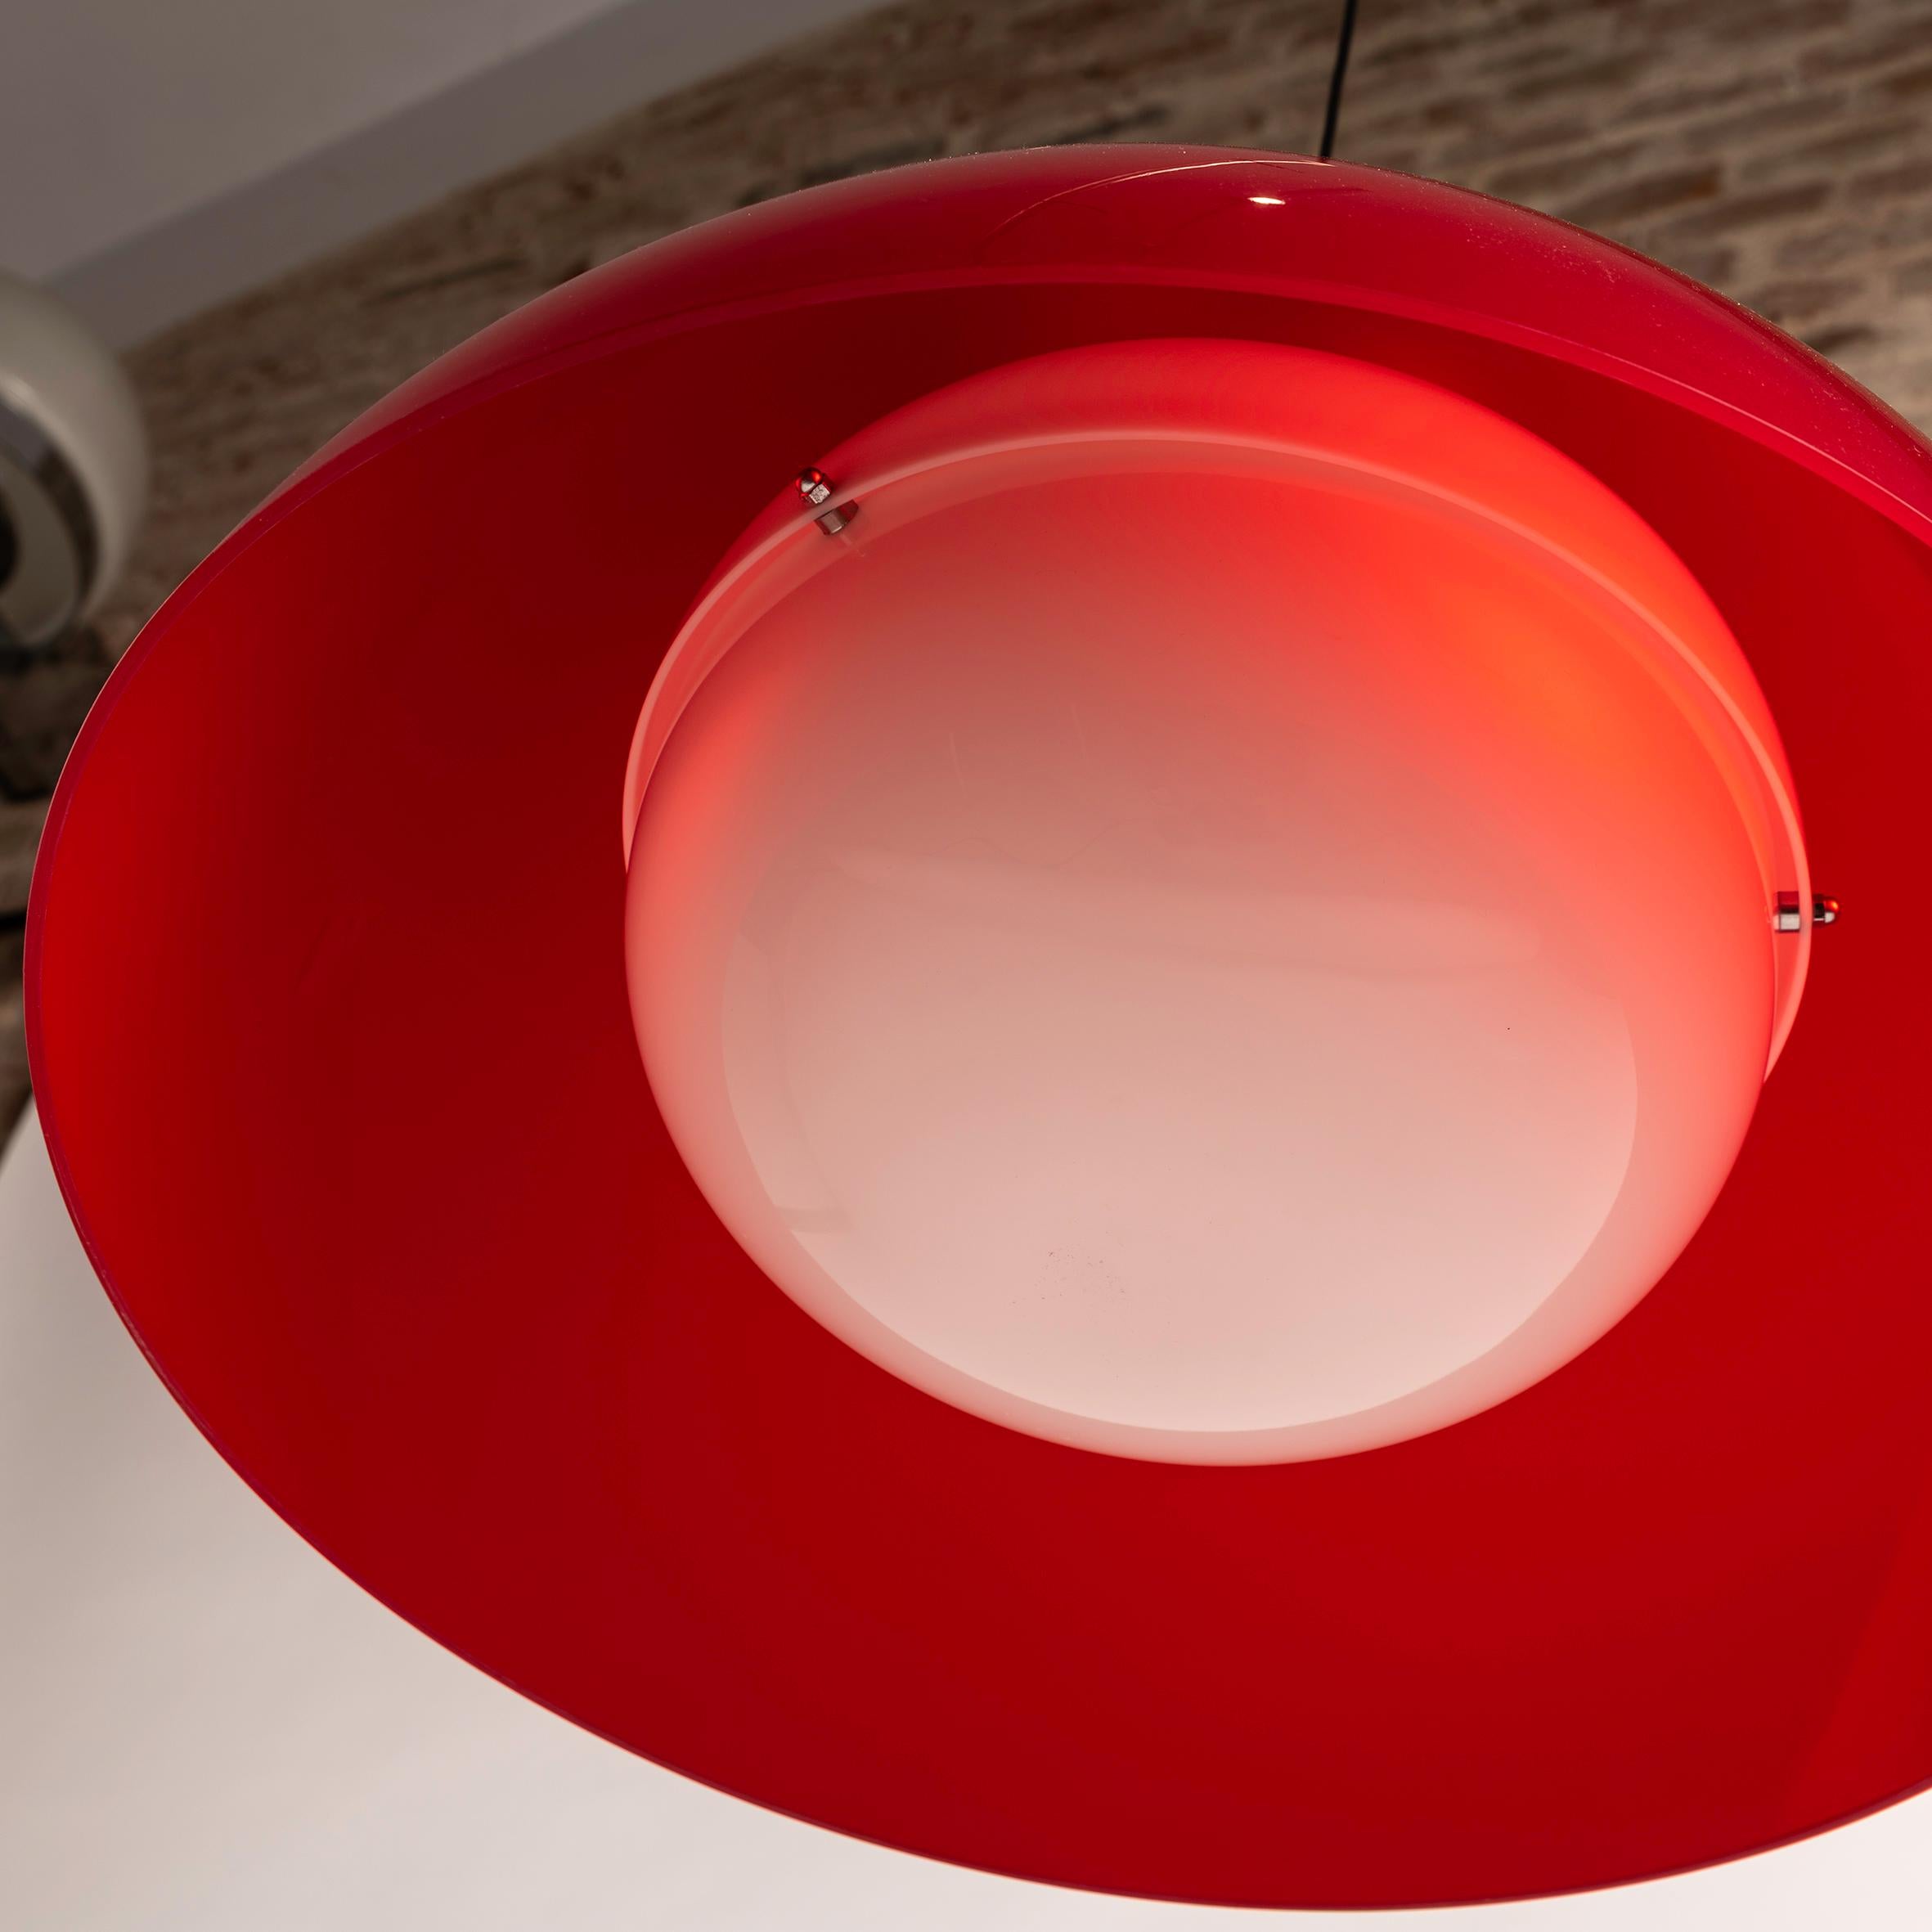 The red Kartell/Tramo KD6 Pendant Lamp, designed by the legendary Achille and Piergiacomo Castiglioni, epitomizes timeless elegance and innovative design. Crafted in collaboration with Tramo, this pendant lamp is a striking manifestation of the